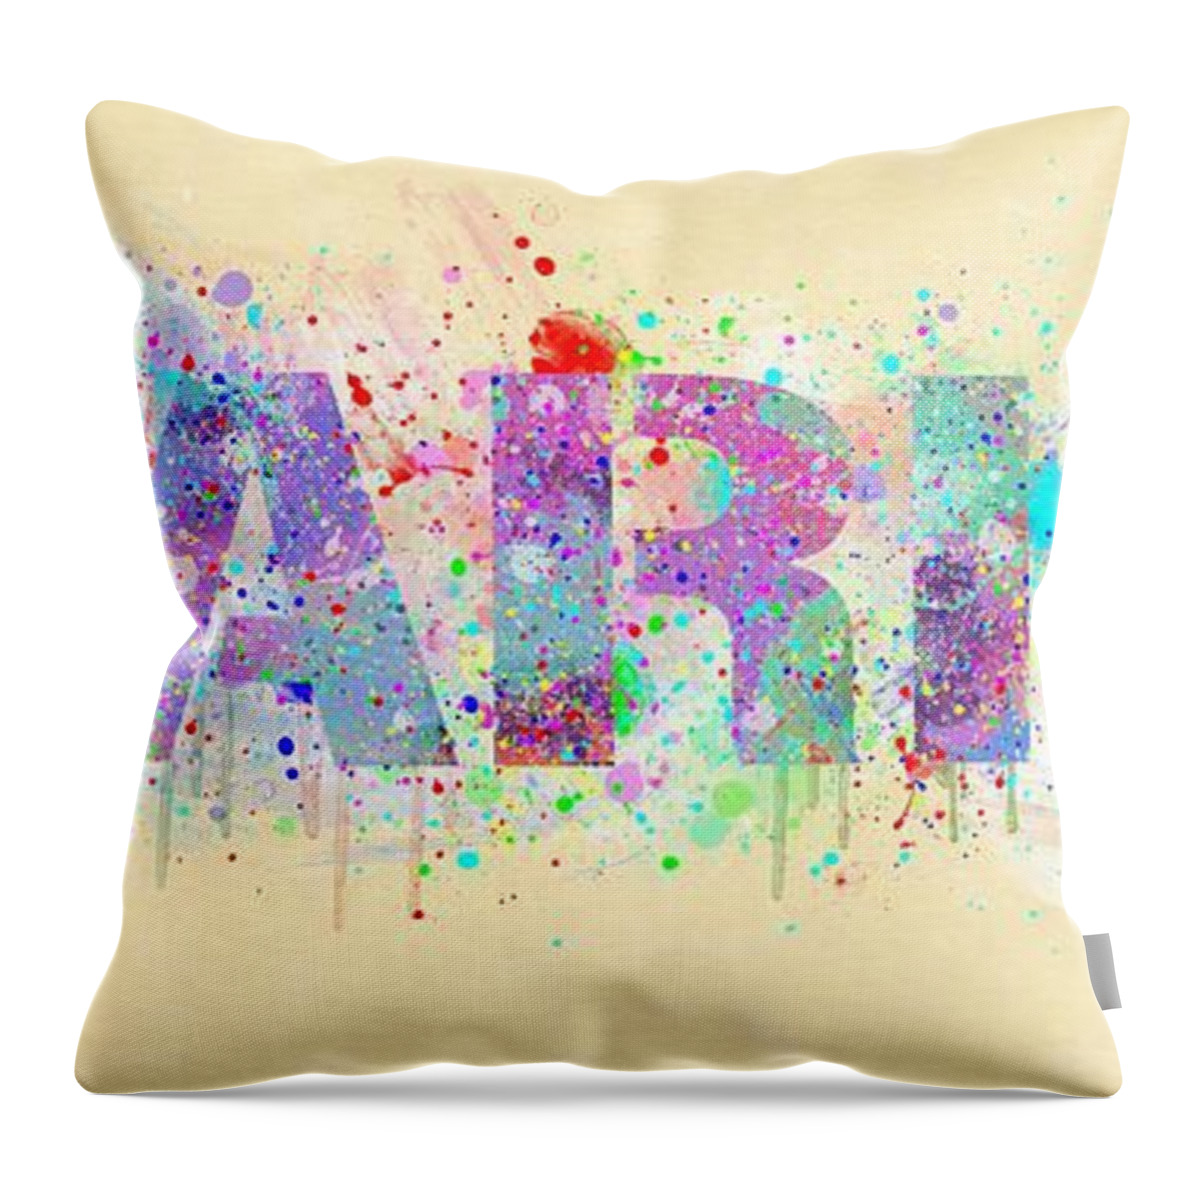 Paris Throw Pillow featuring the mixed media Abstract Paris - France by Stefano Senise